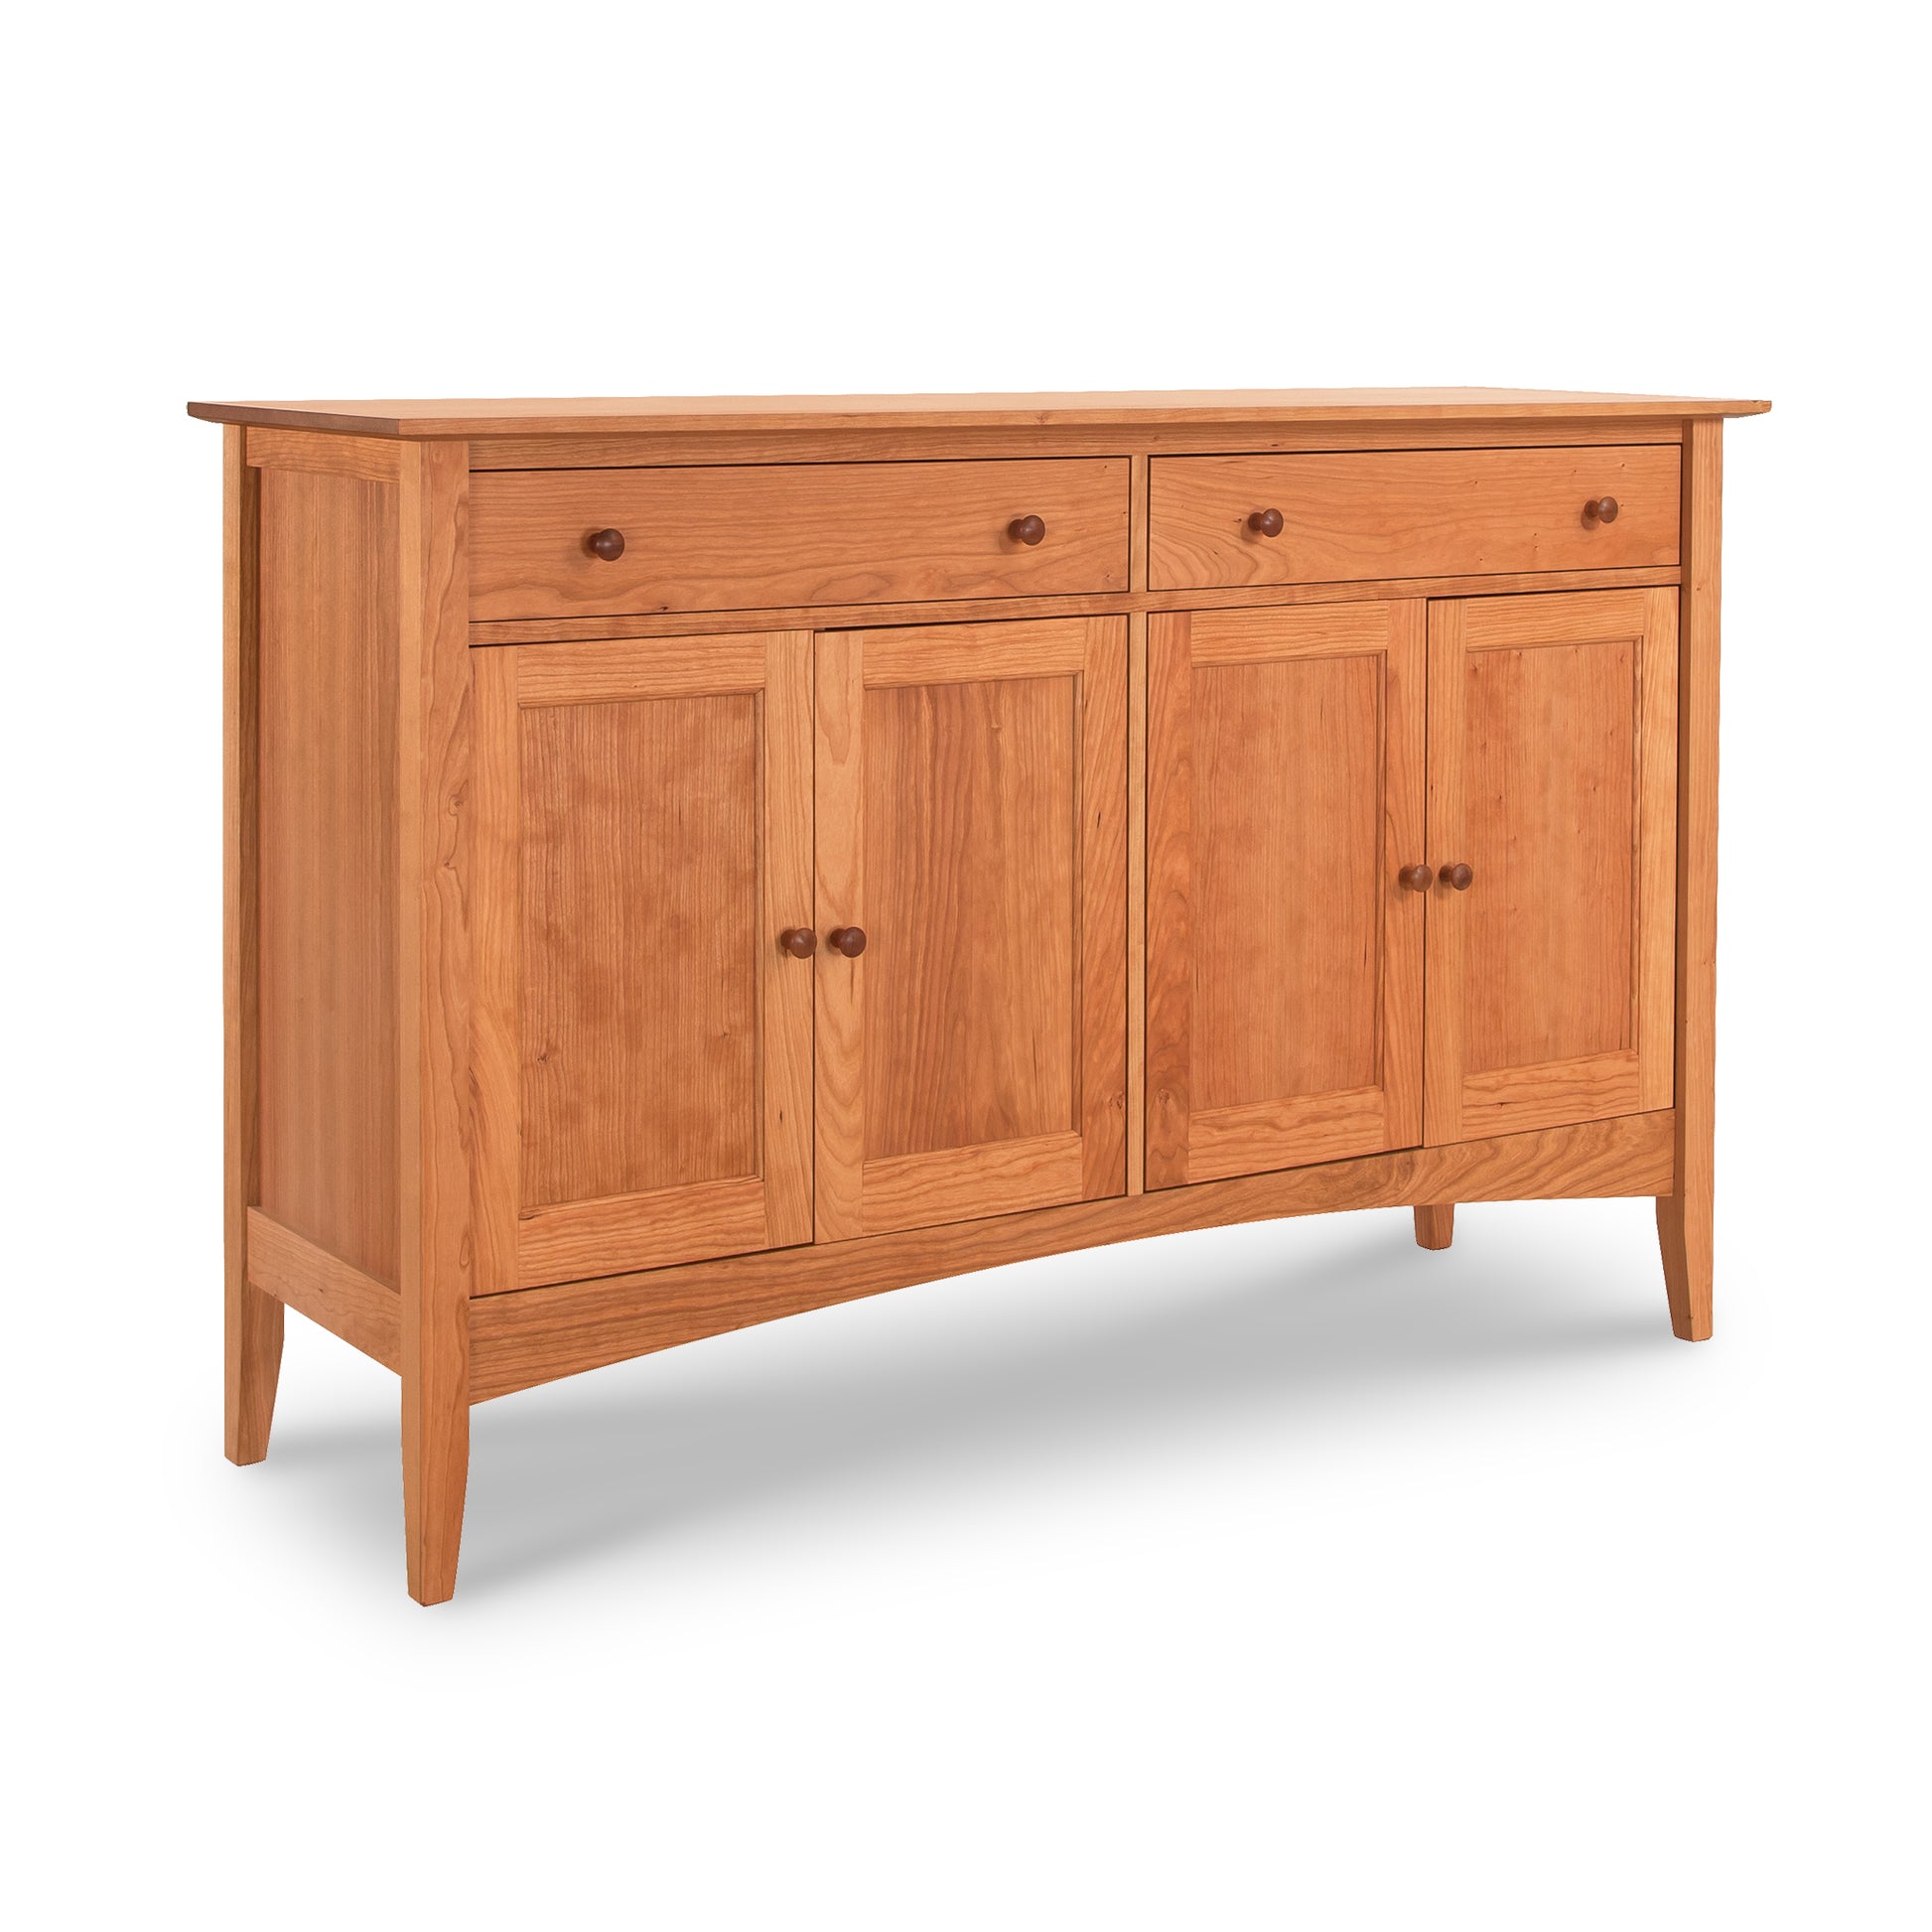 The Maple Corner Woodworks American Shaker Large Sideboard - Floor Model is a solid hardwood construction piece with two doors and two drawers, showcasing Vermont craftsmanship.